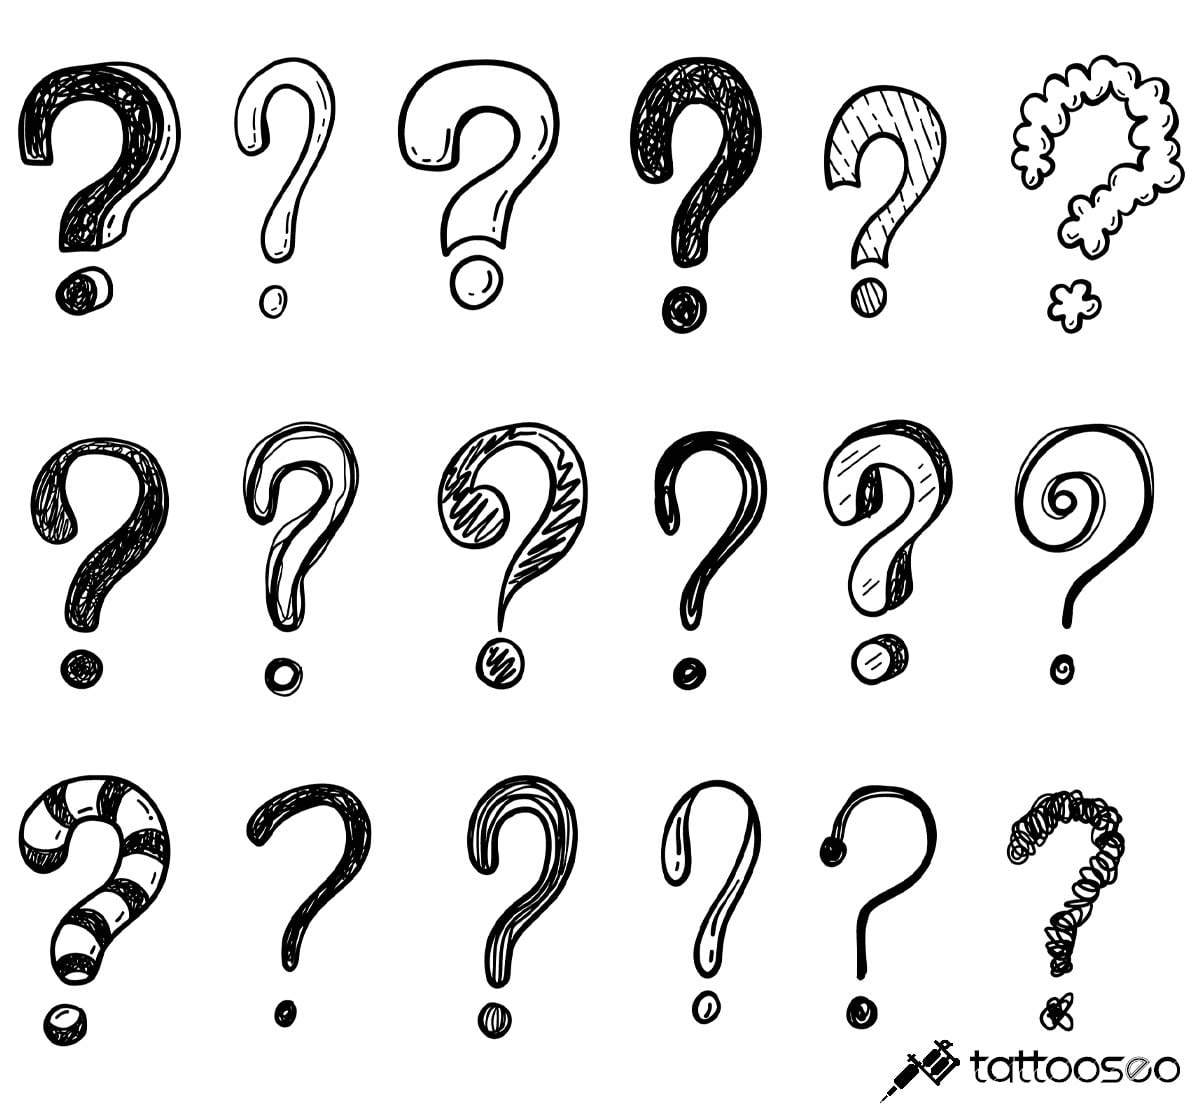 Question mark tattoo meanings